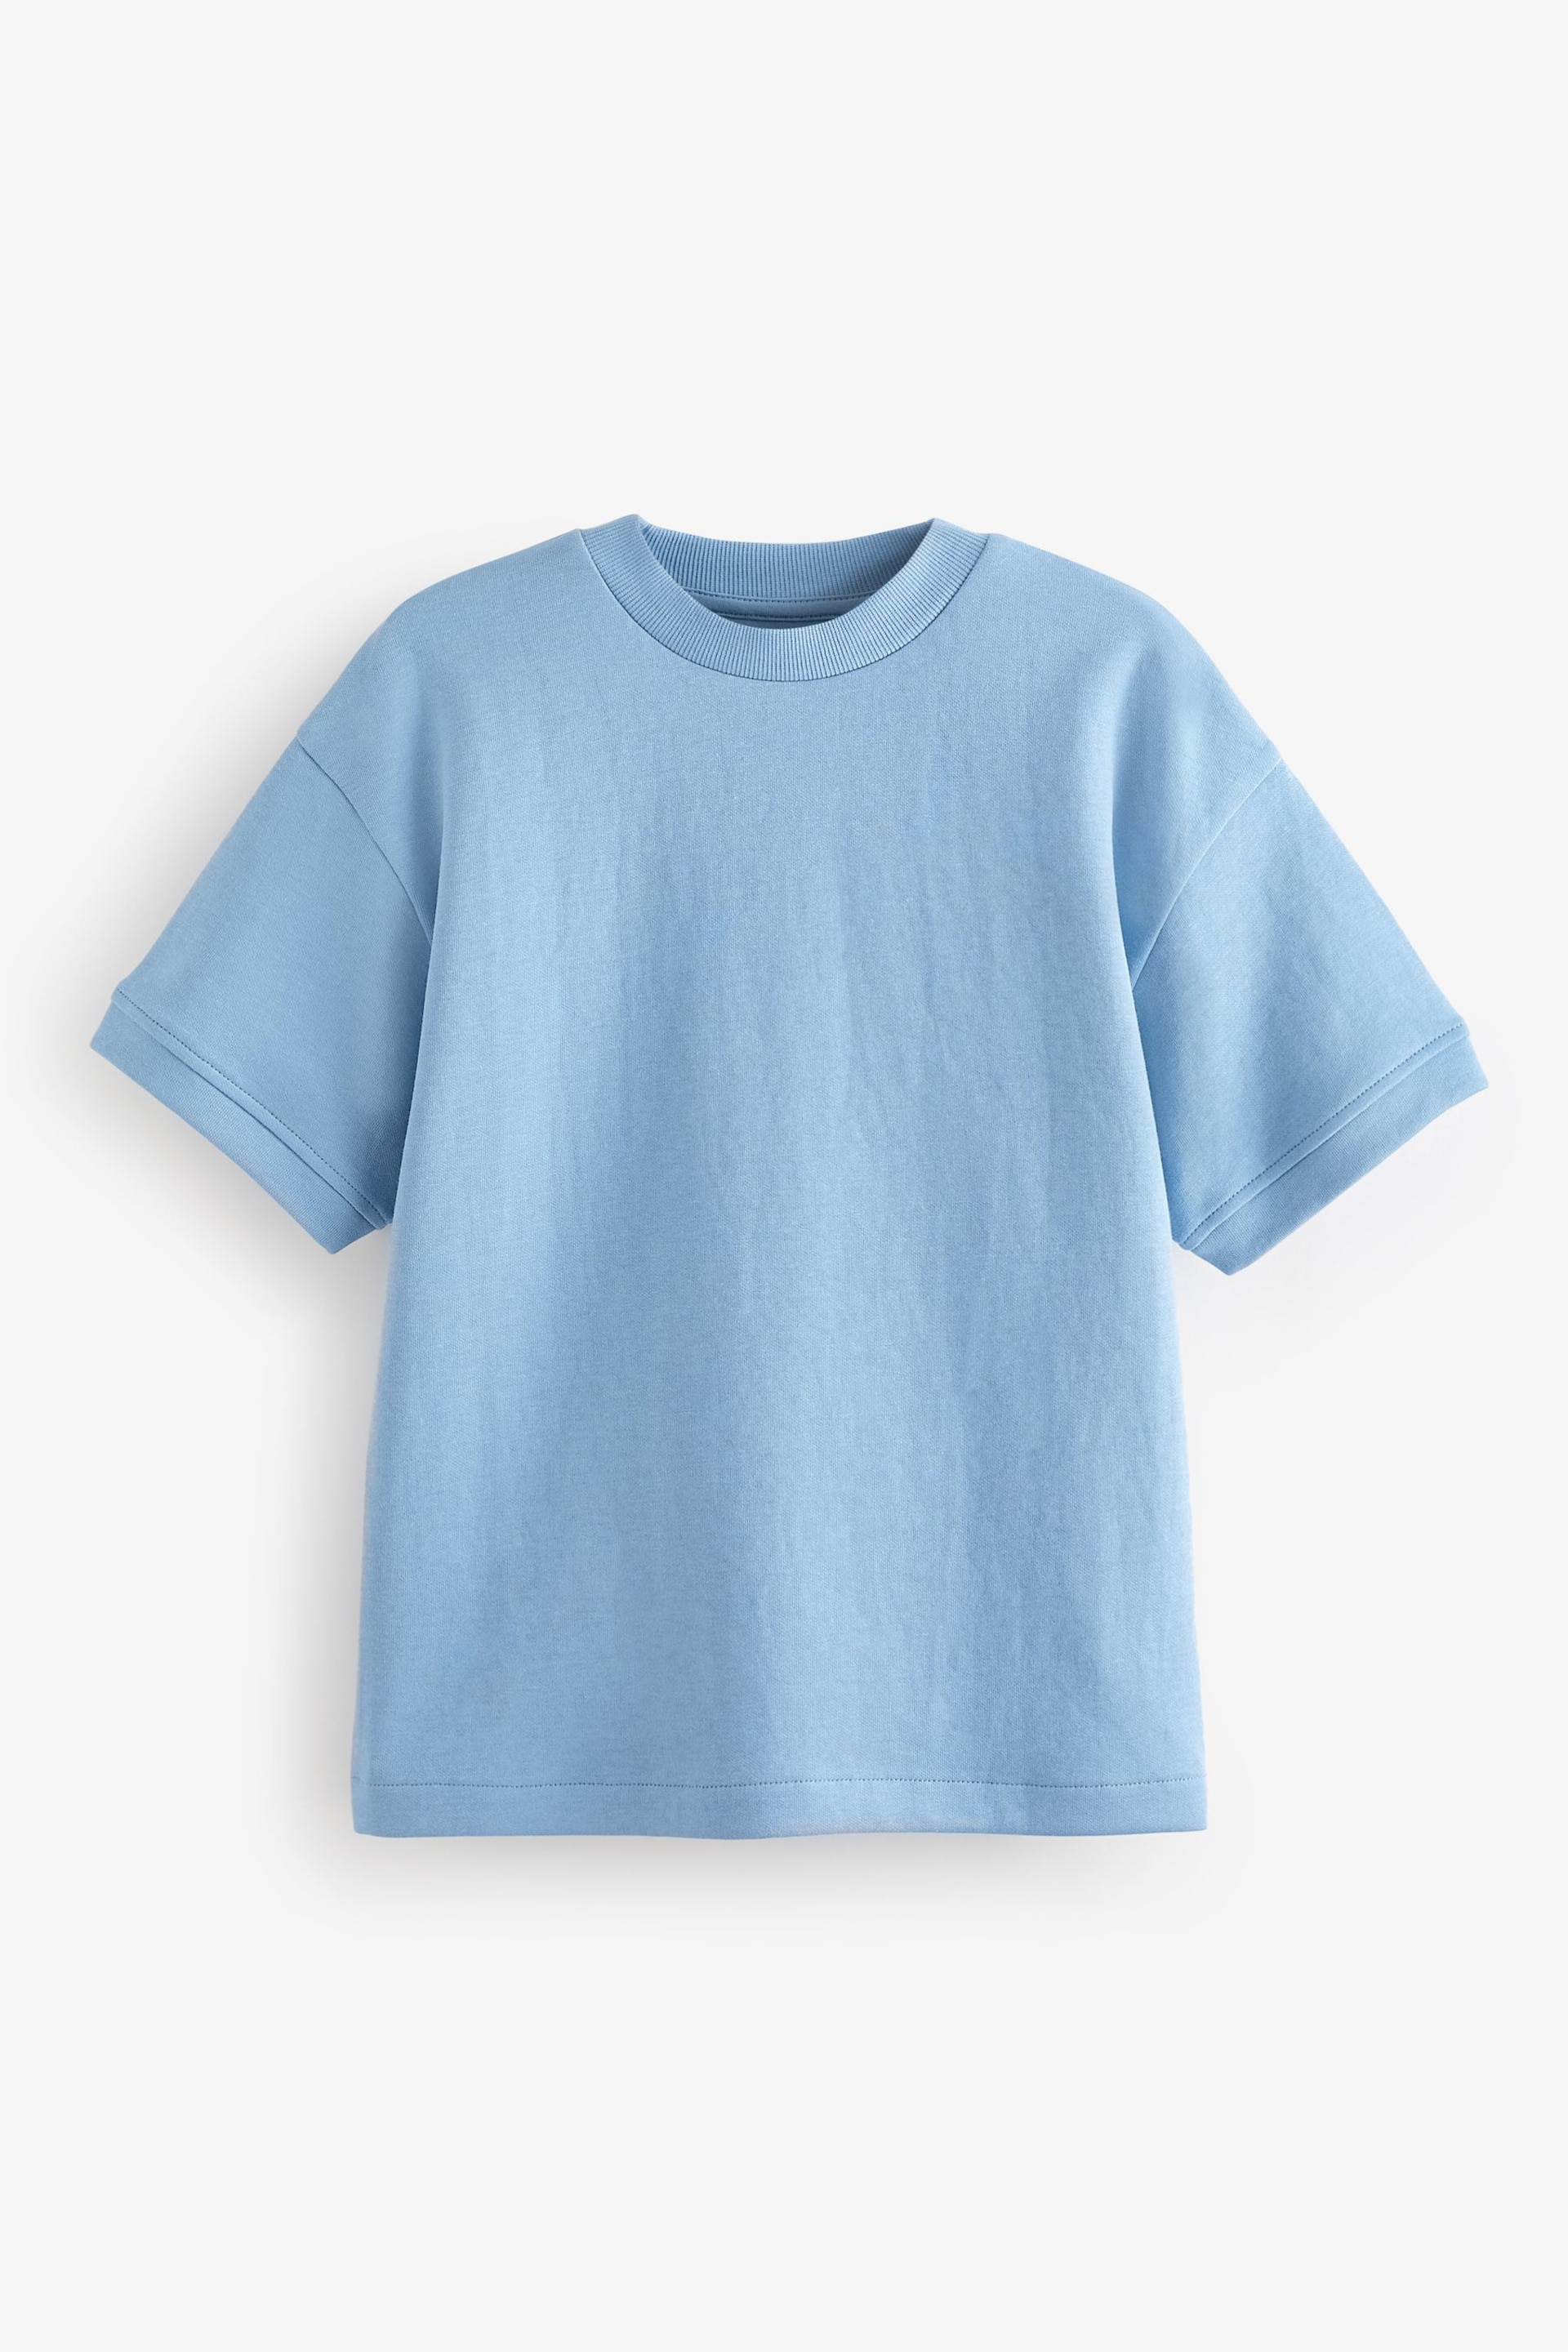 Blue Relaxed Fit Heavyweight T-Shirt (3-16yrs) - Image 1 of 3